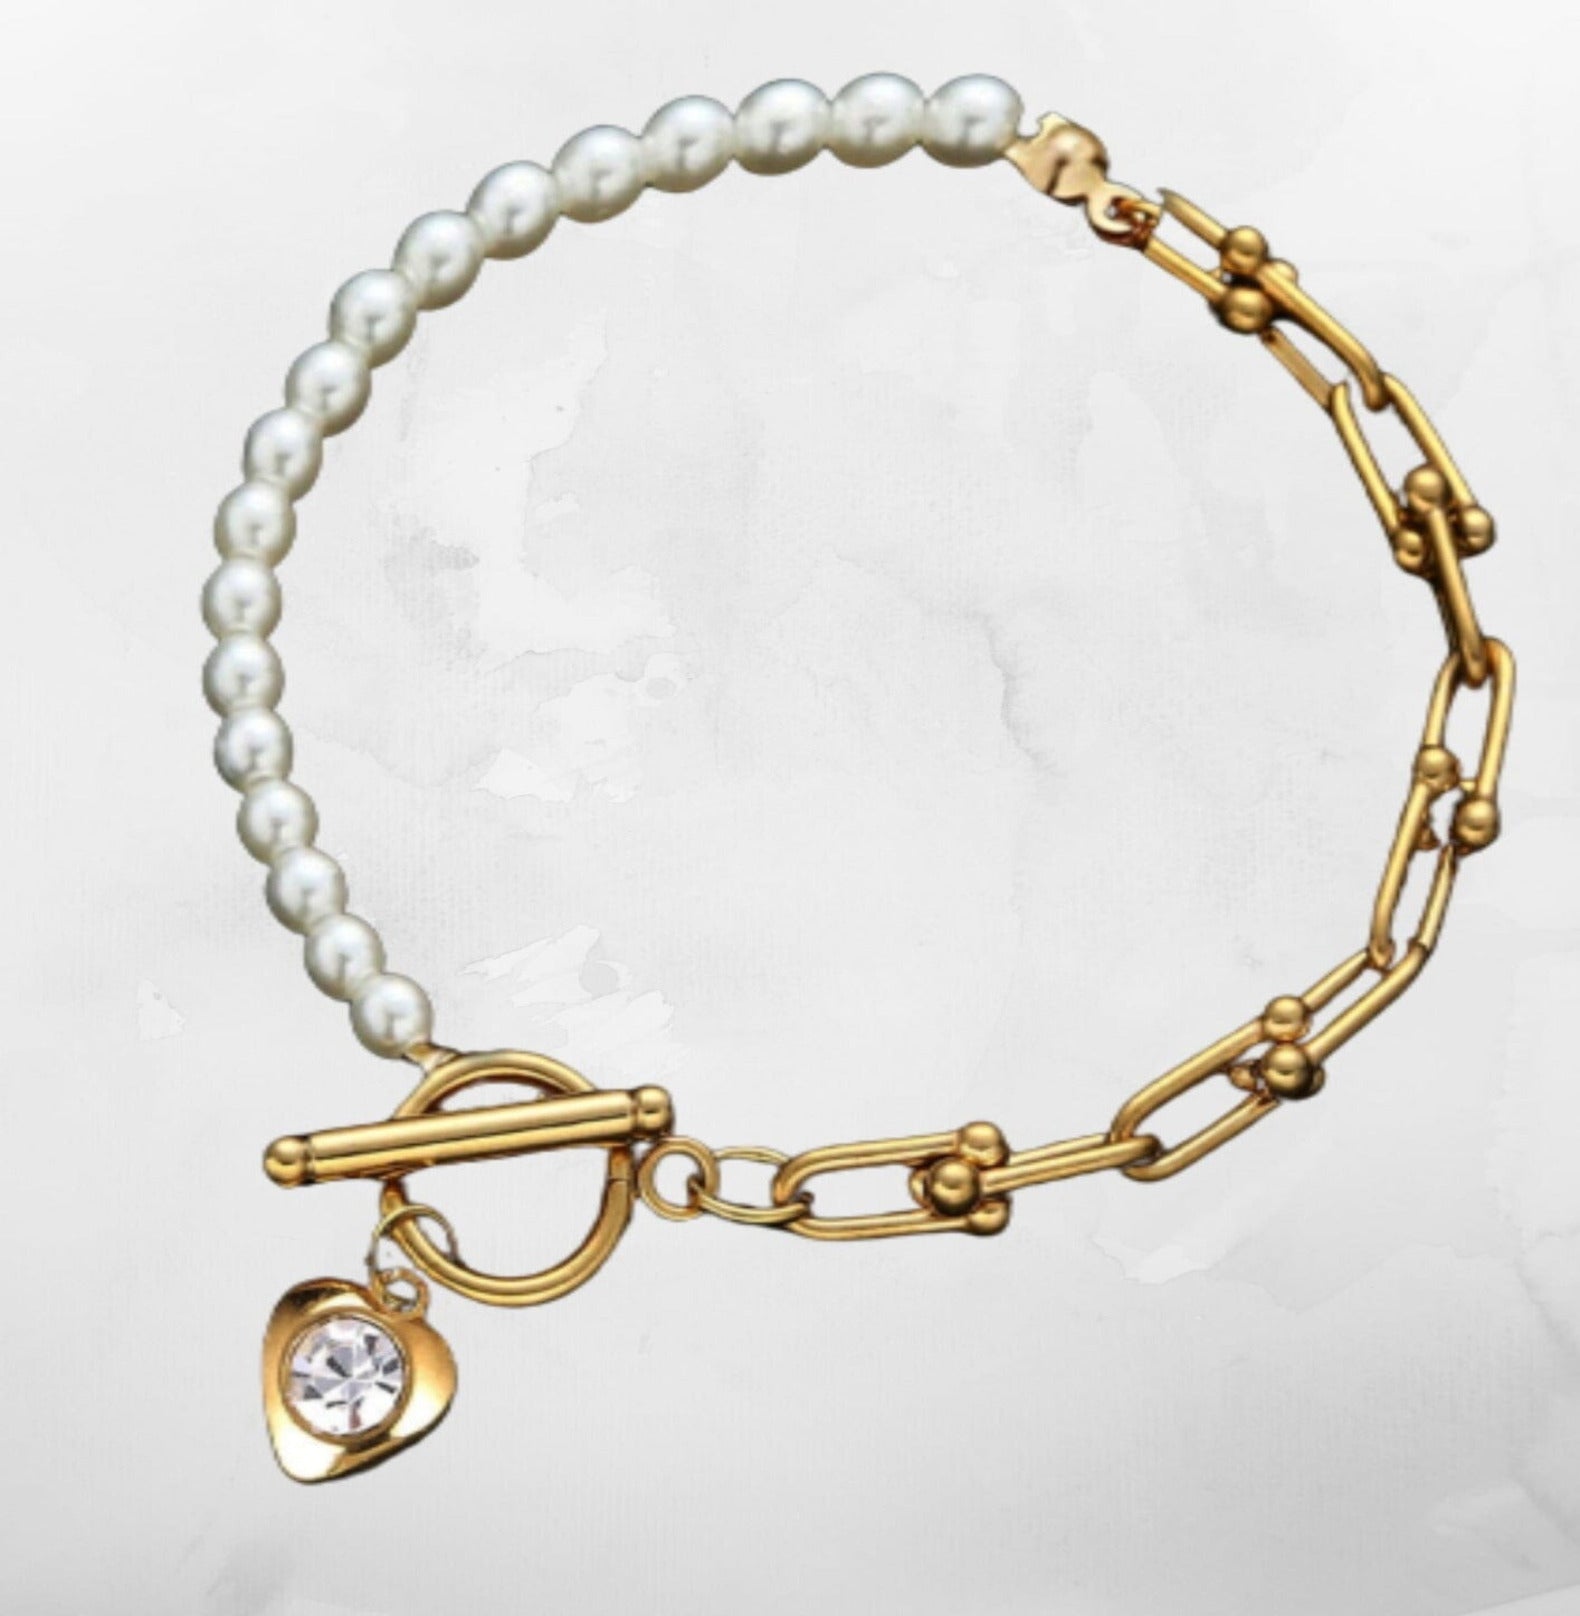 CRYSTAL PEARL BRACELET braclet Yubama Jewelry Online Store - The Elegant Designs of Gold and Silver ! 